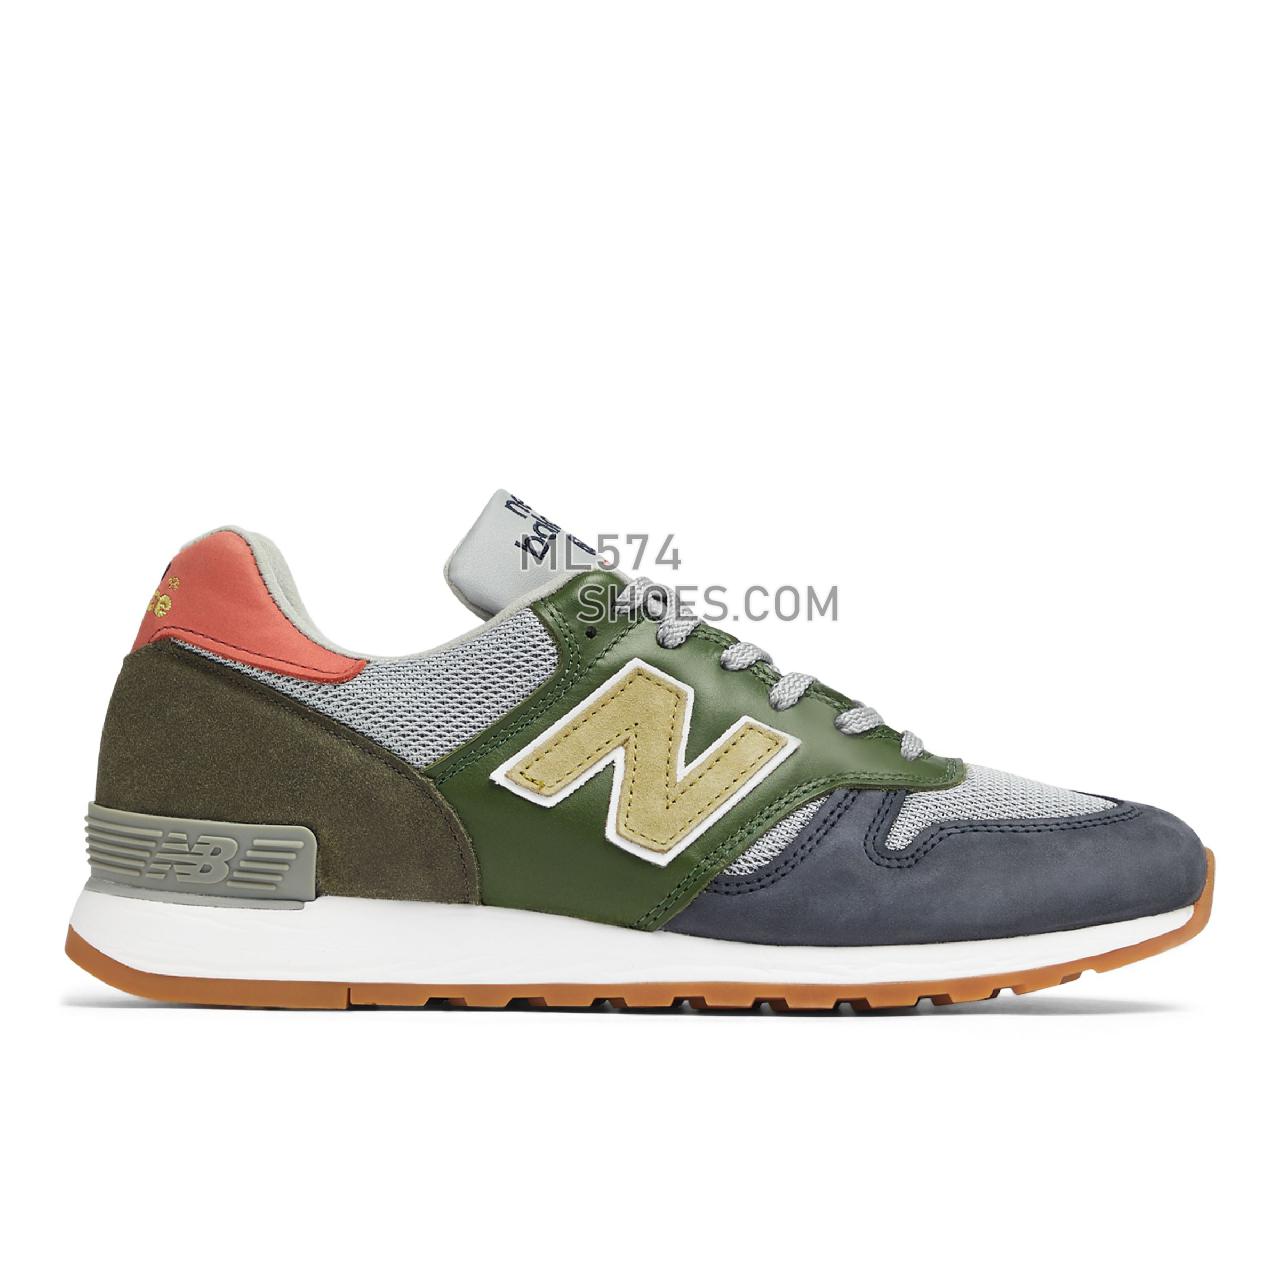 New Balance MADE UK 670 - Men's Made in USA And UK Sneakers - Green with Grey and Pink - M670SPK